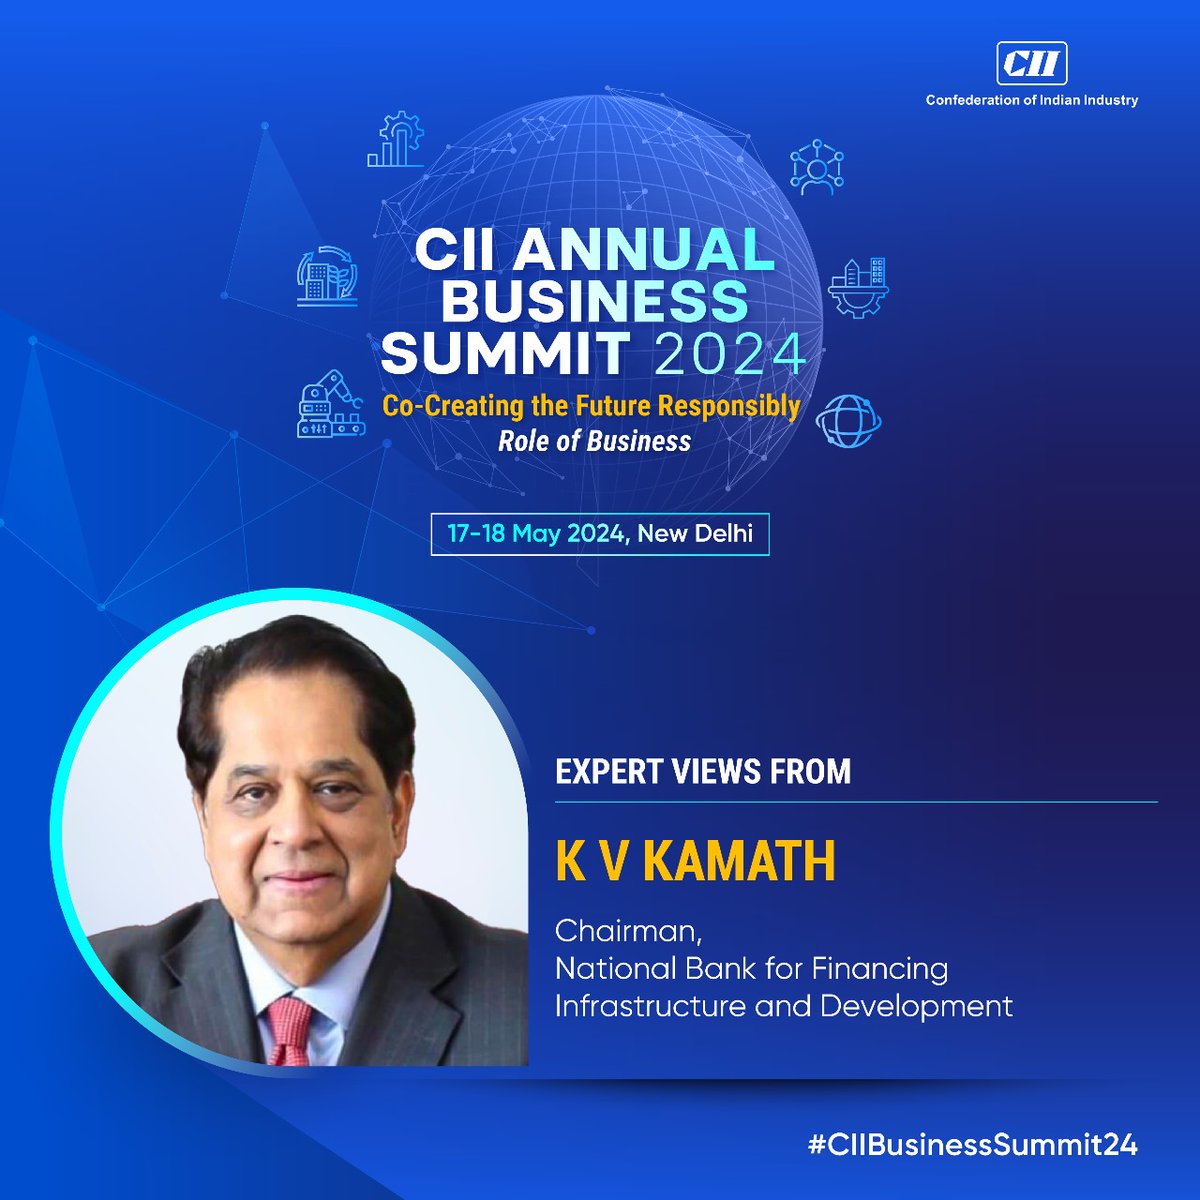 K V Kamath, Chairman, National Bank for Financing Infrastructure and Development shares insights at the CII Annual Business Summit 2024! Join the discussion as top experts and thought leaders deliberate on India's journey towards development and economic prosperity. Block your